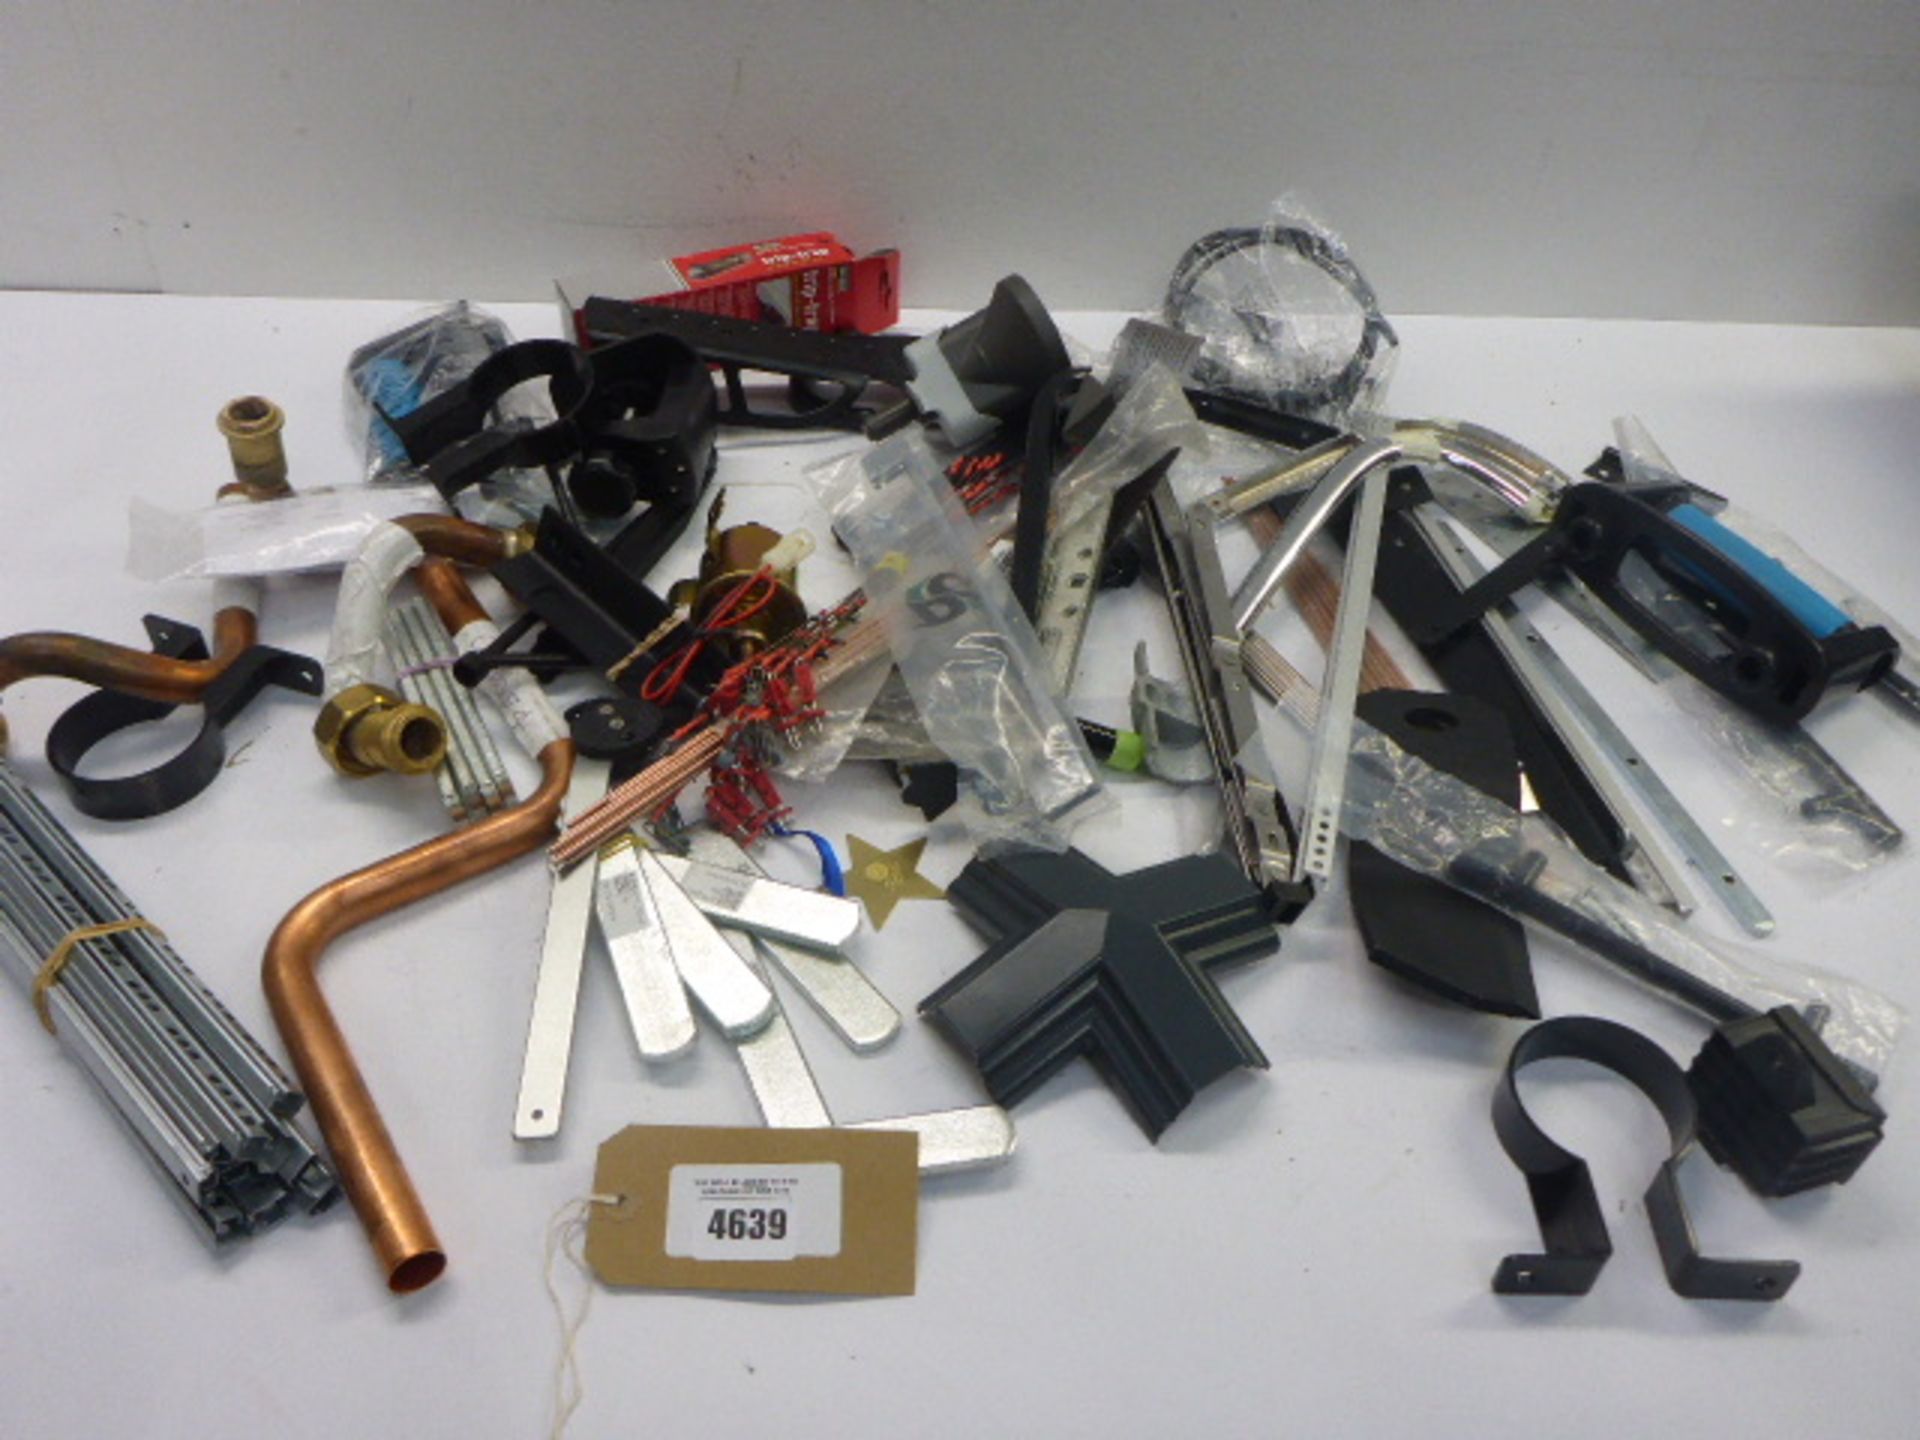 Drawer runners, copper pipe, metal plates, brackets, mouse trap etc